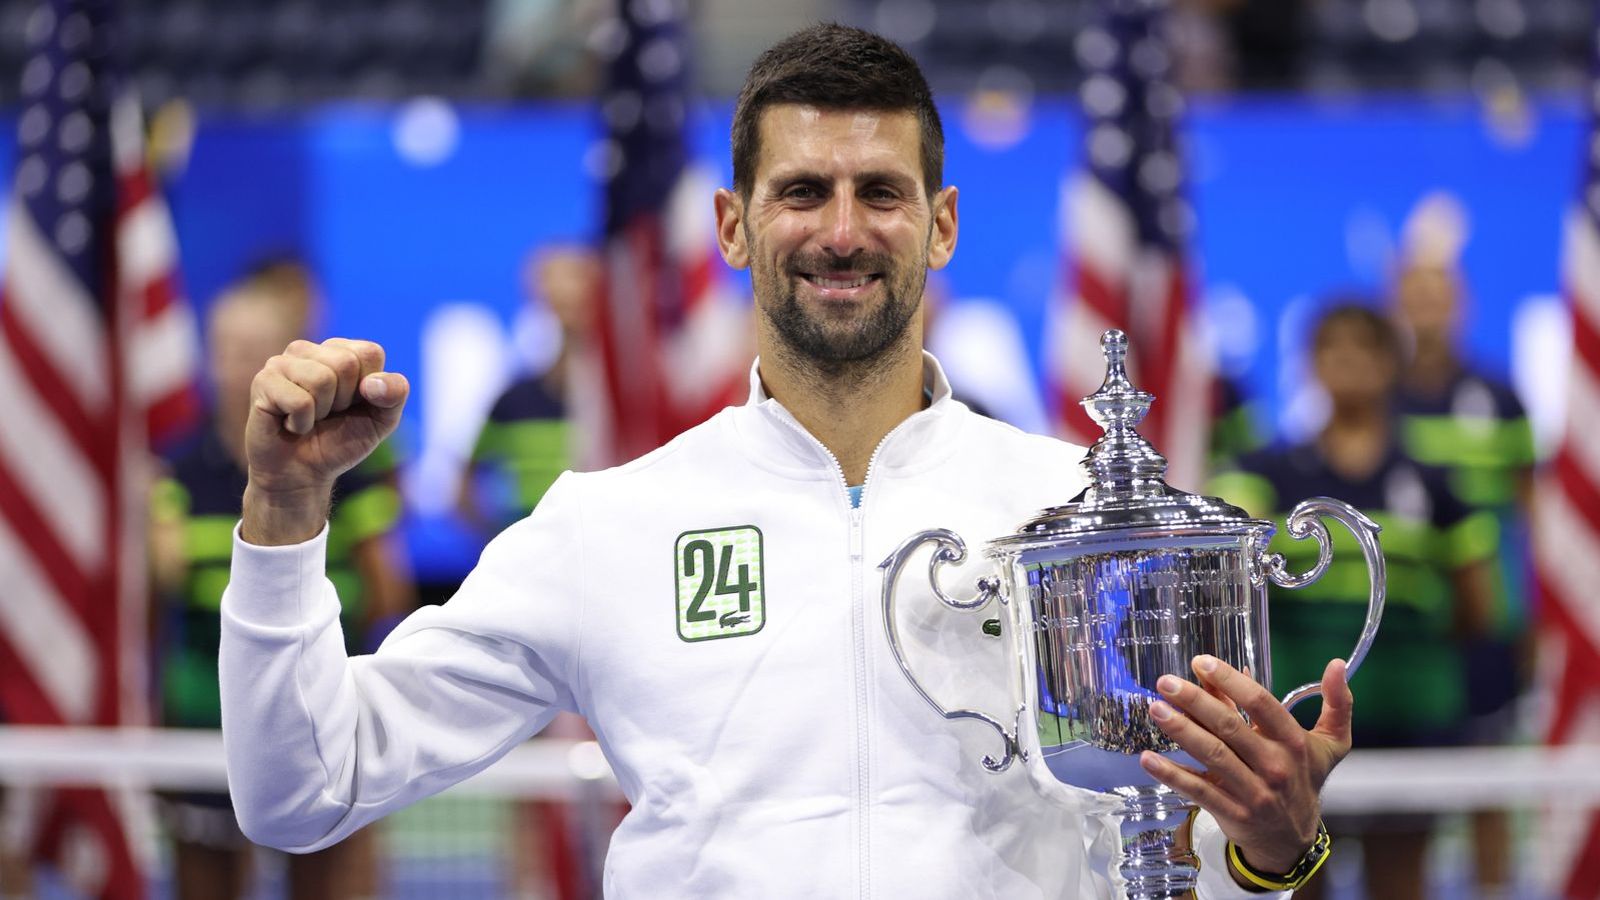 Novak Djokovic claims fourth title in New York and historic 24th Grand Slam